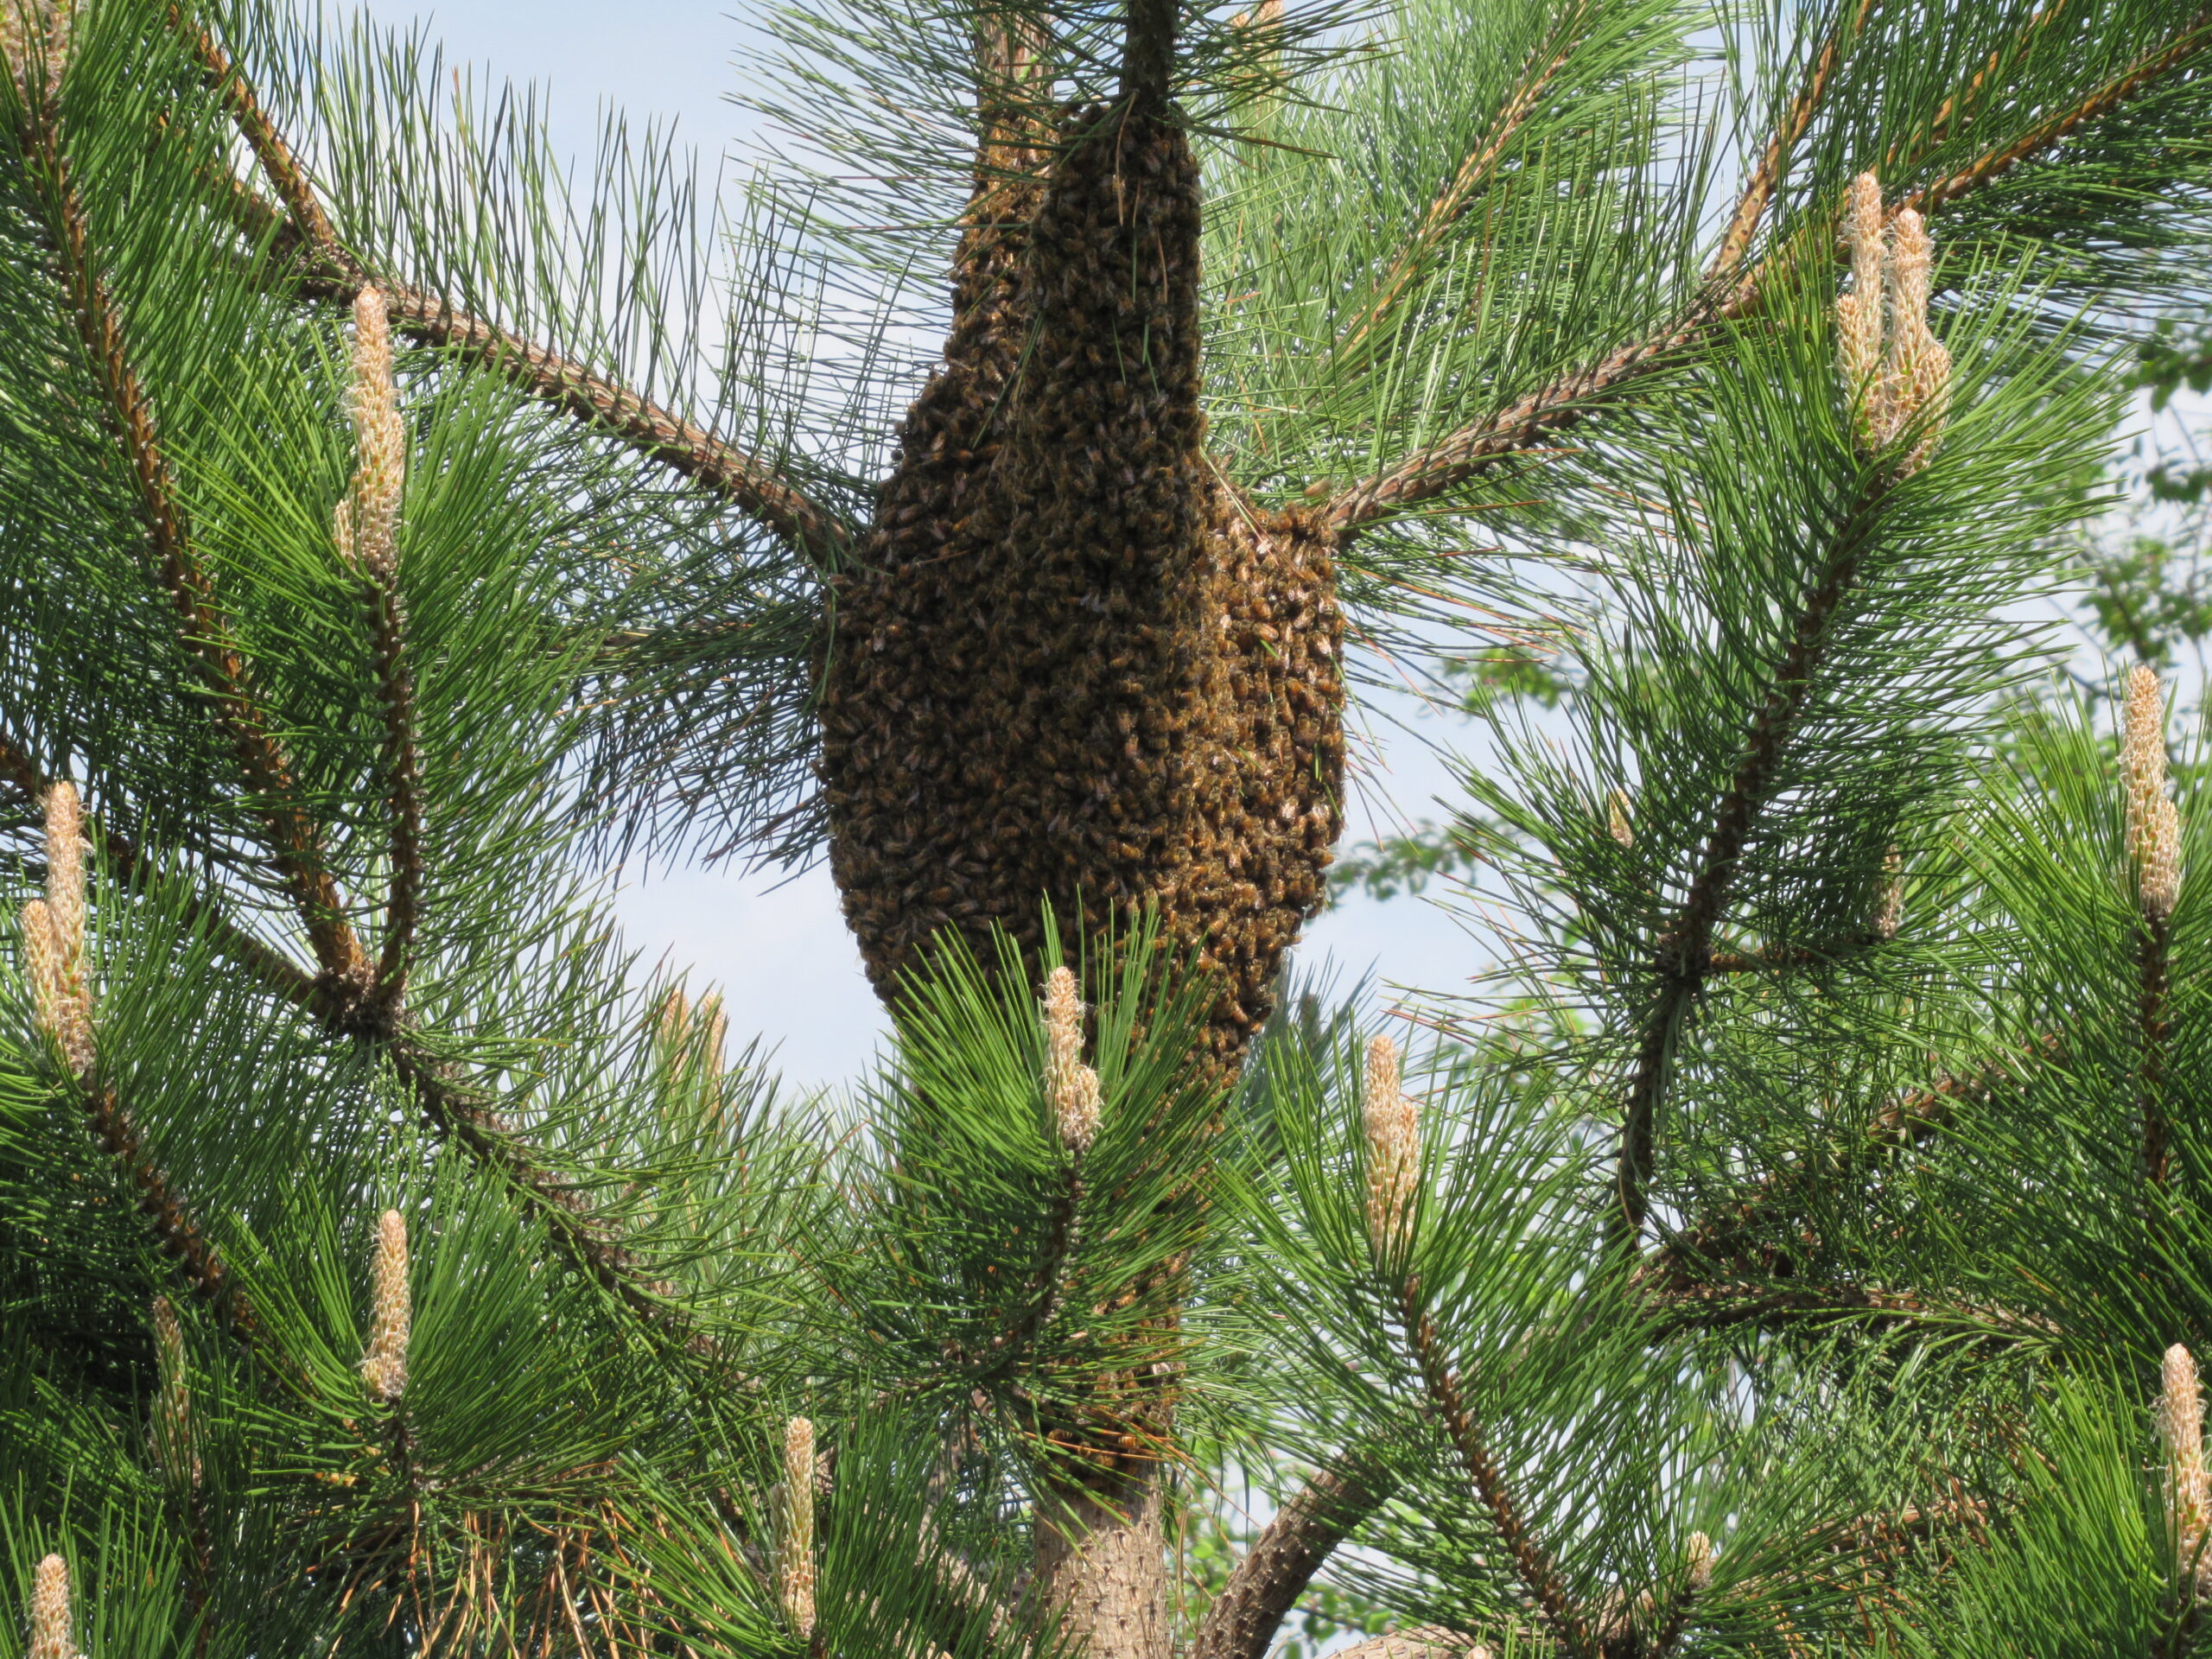 Swarm in a pine tree.